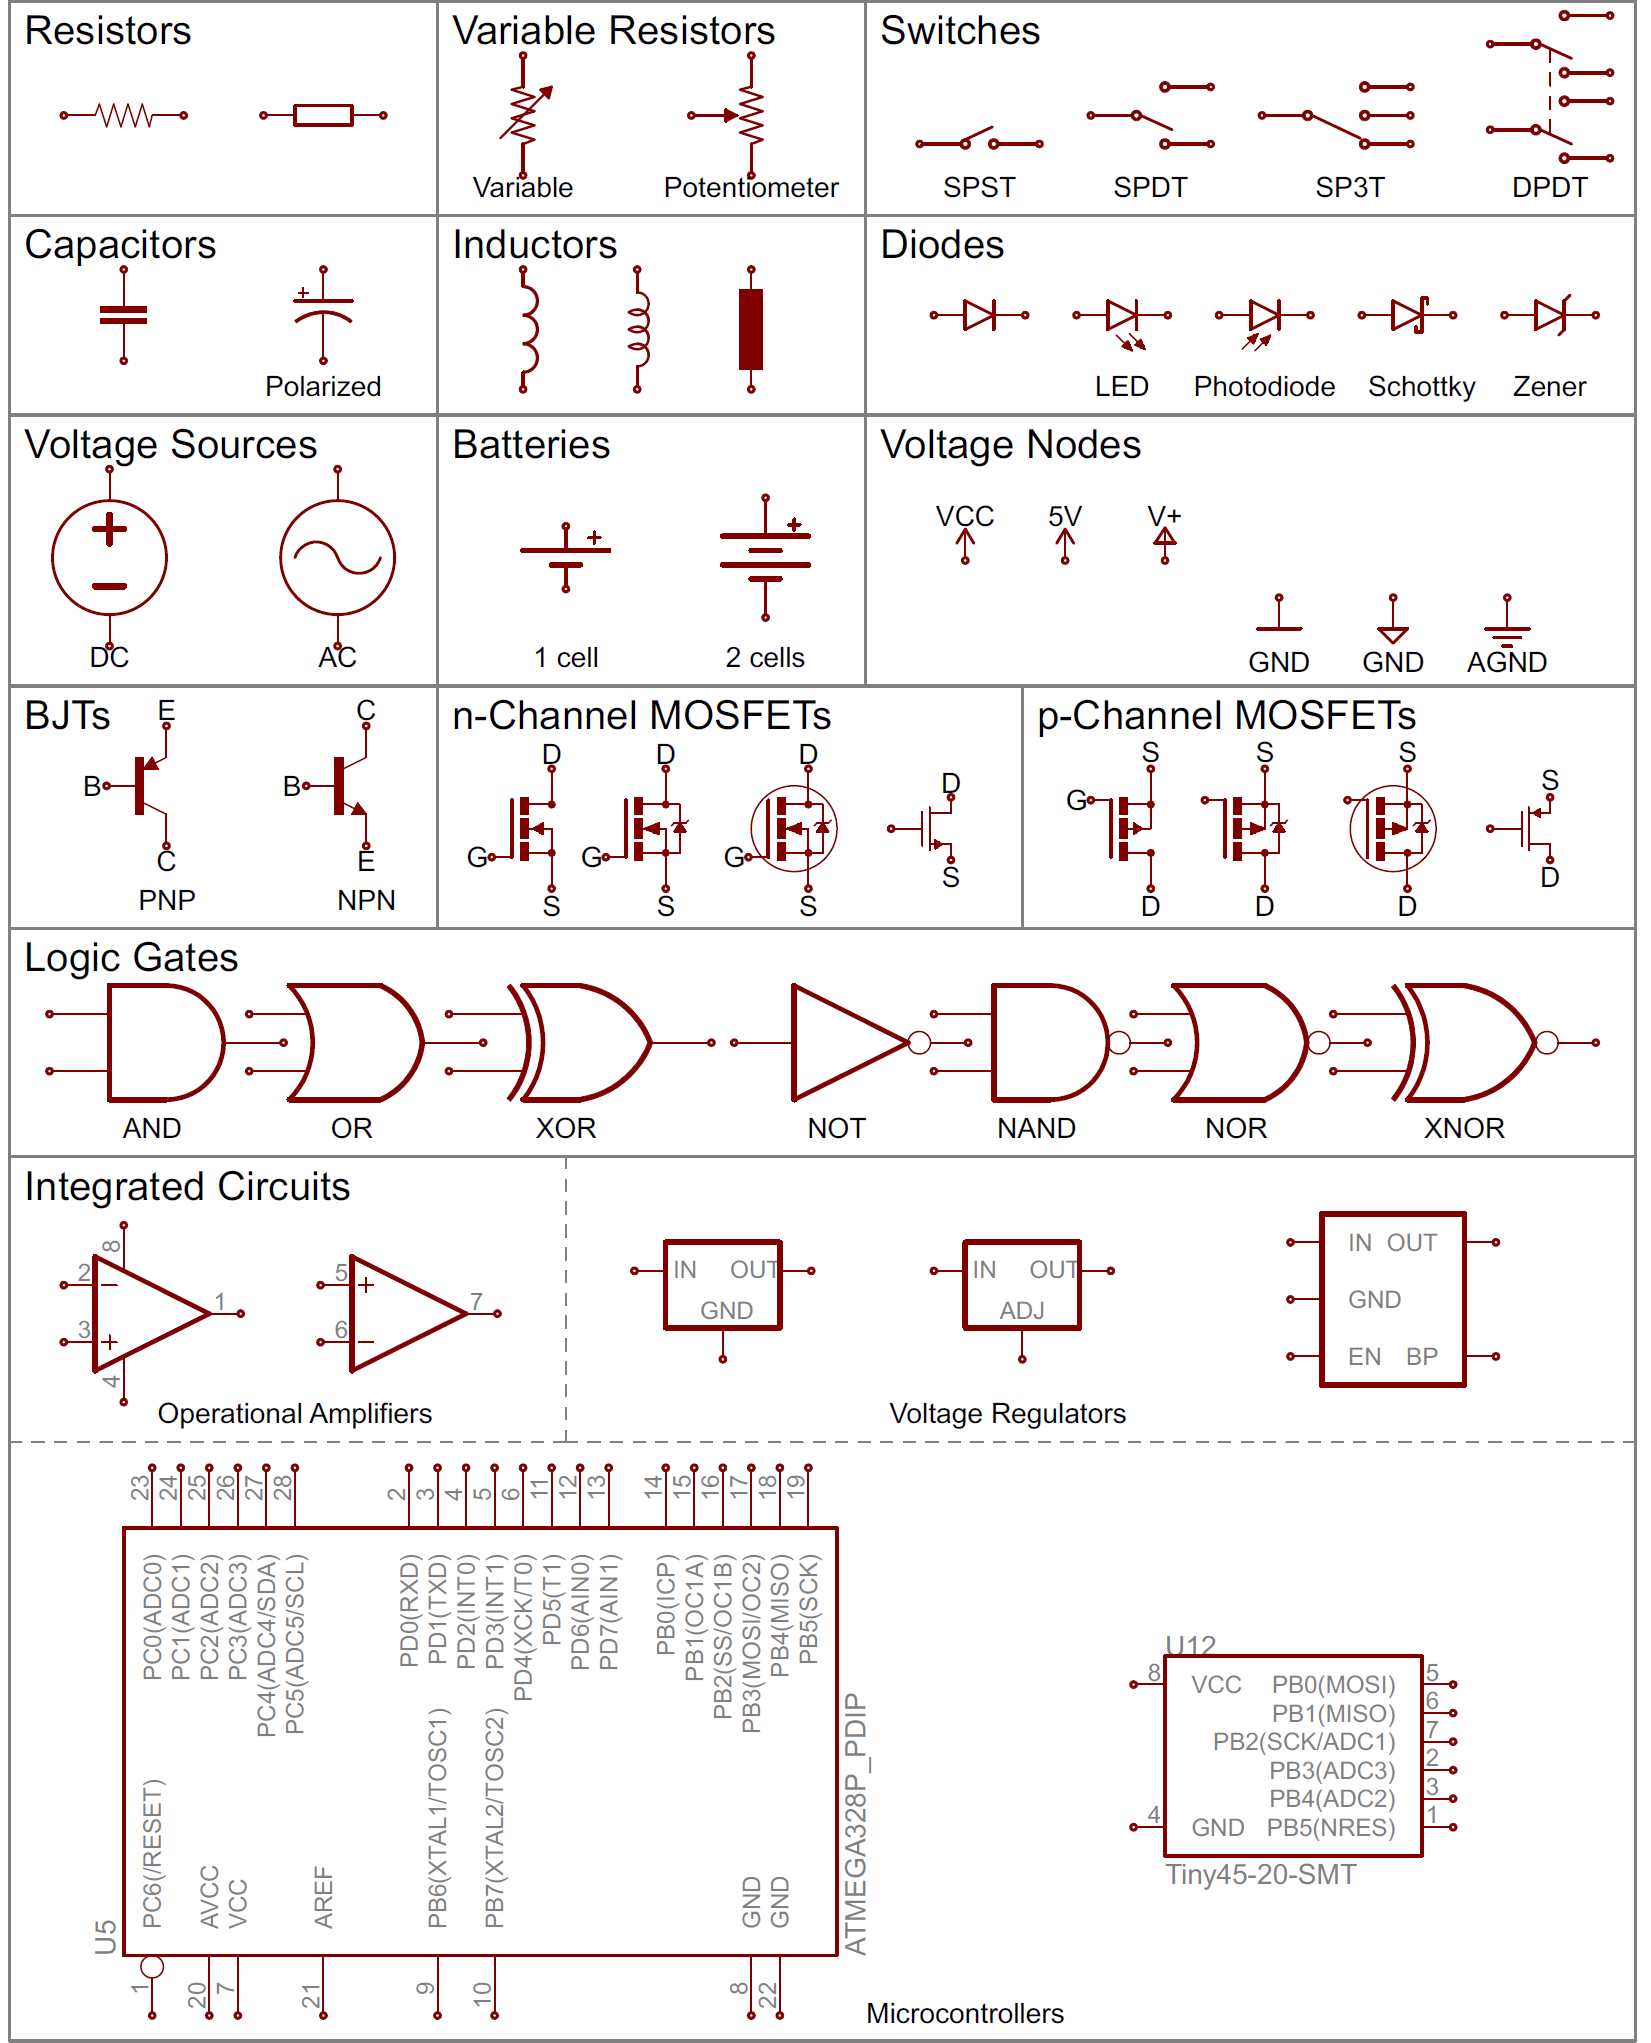 Wiring Diagram Symbols How To Read A Schematic Learnsparkfun